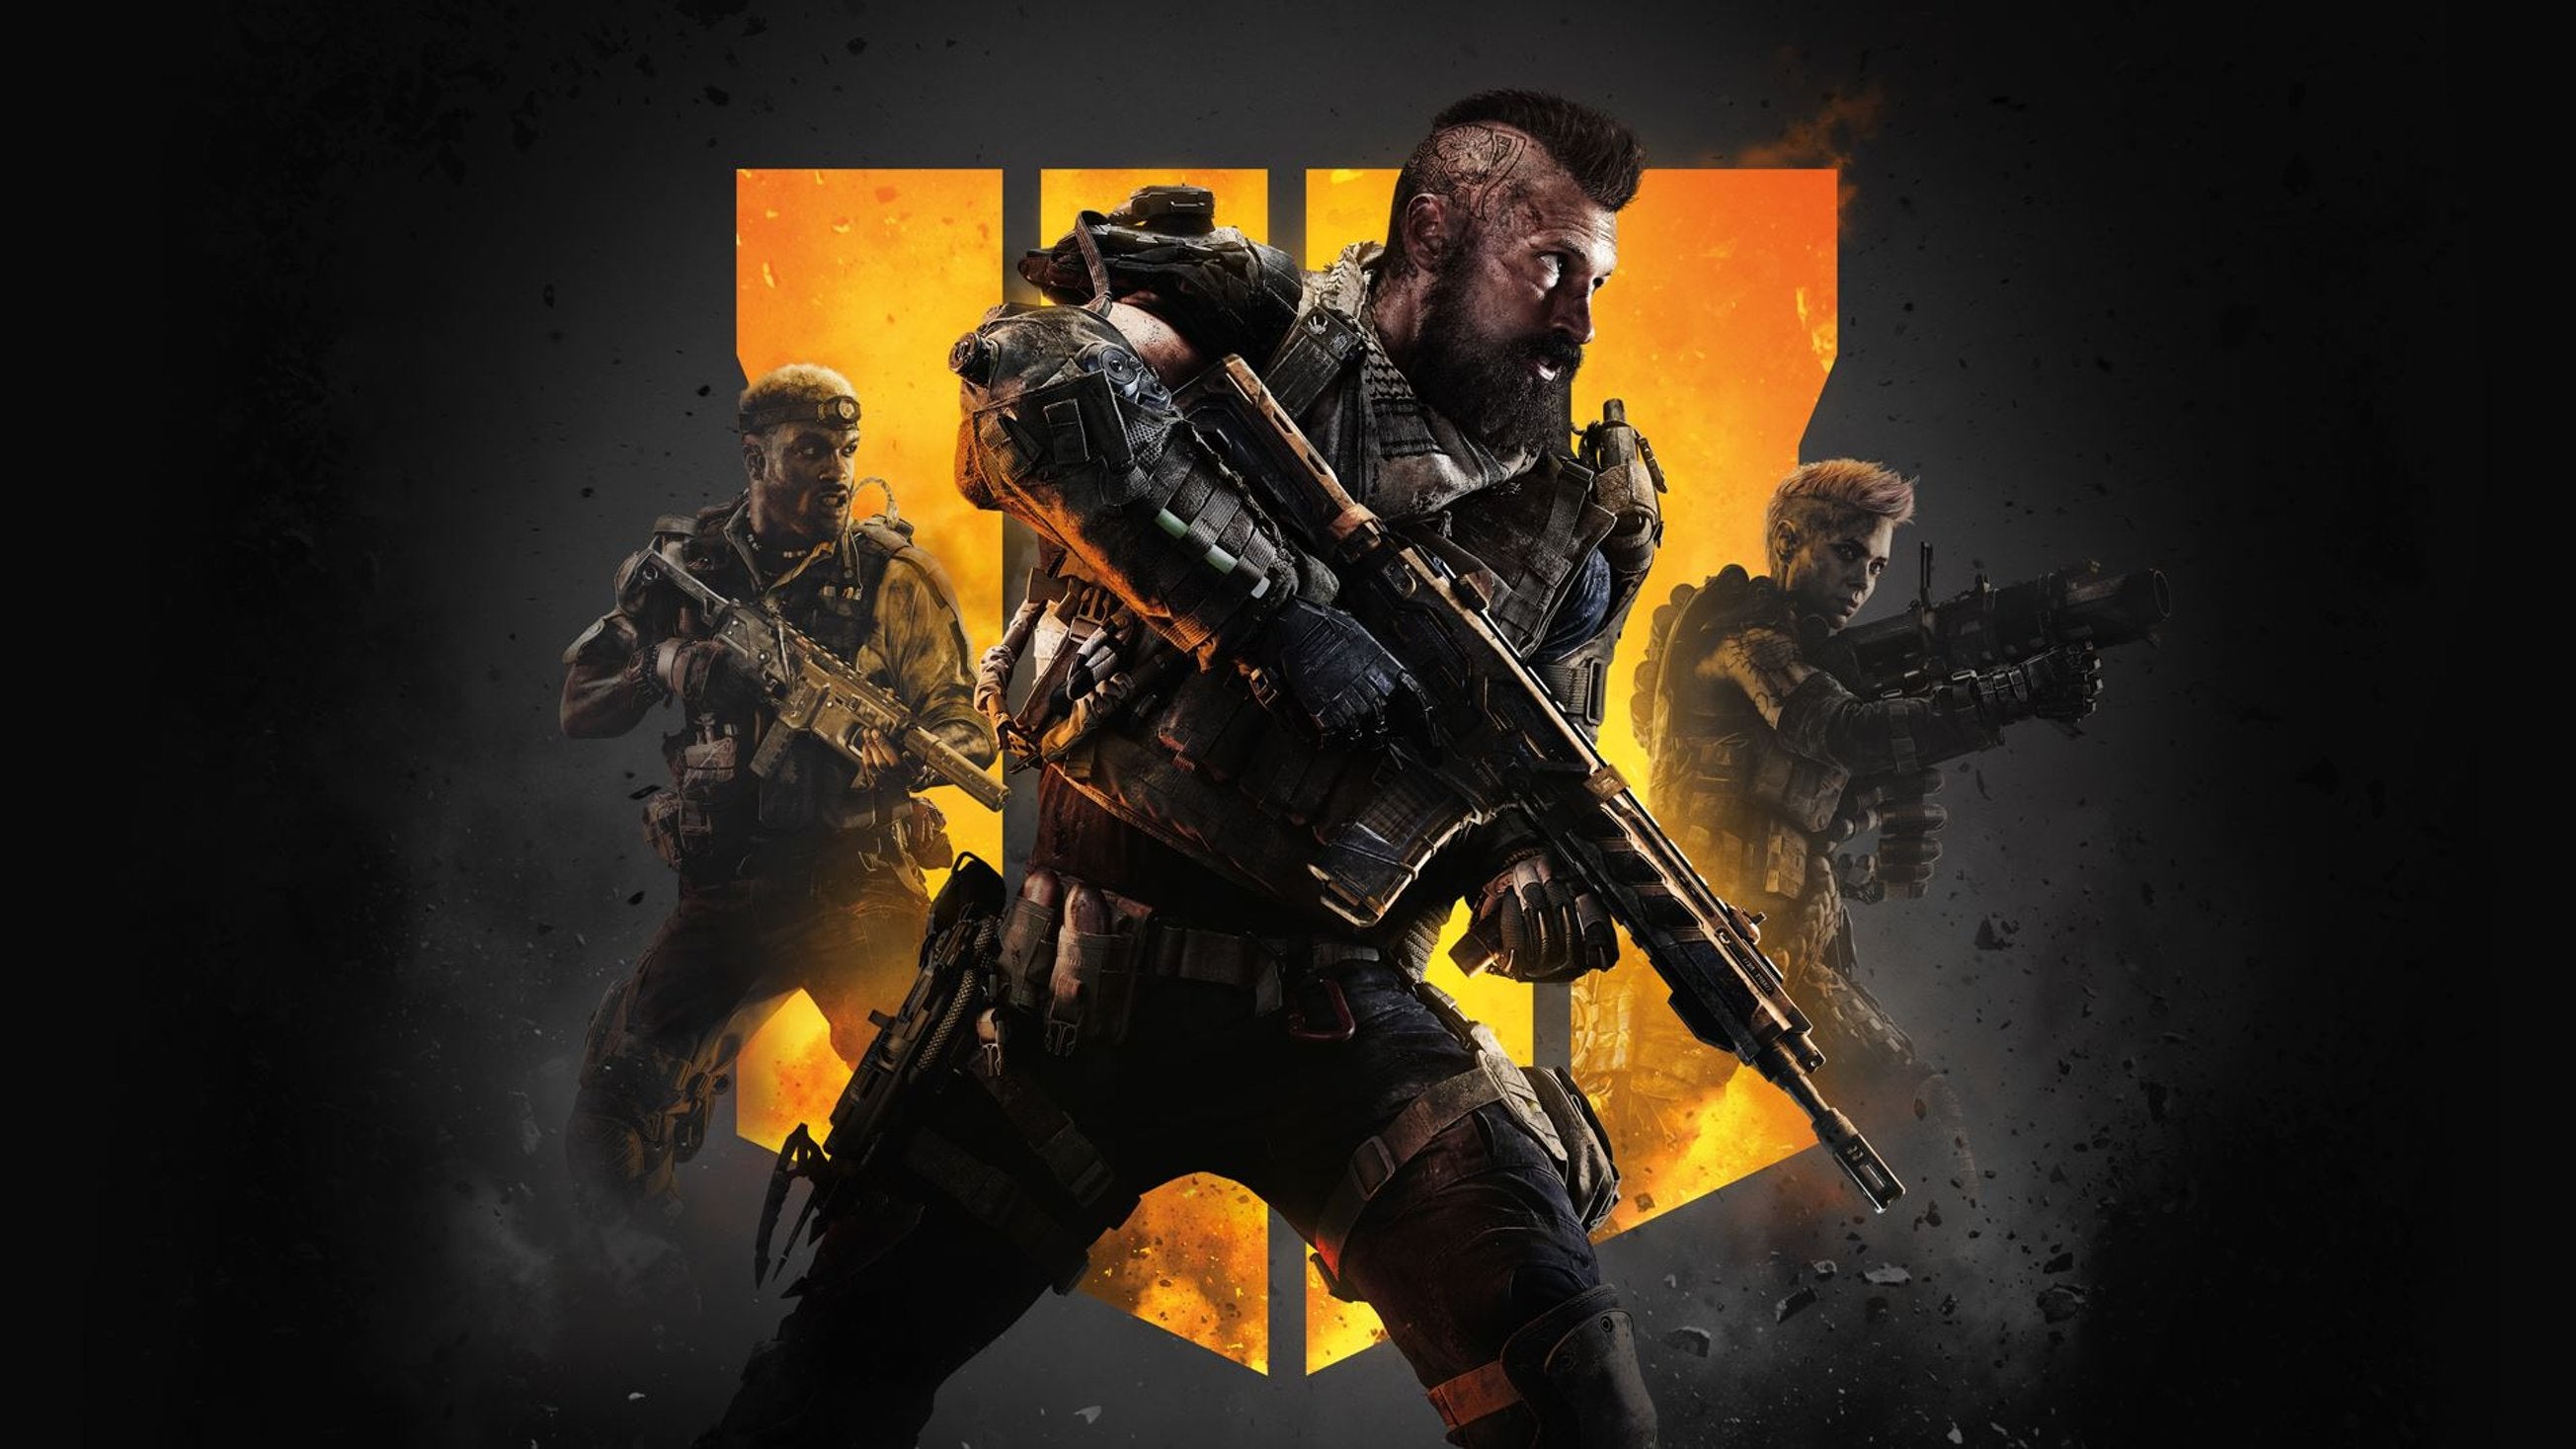 Image for COD Black Ops 4: Behind The Scenes - Blackout, PC, Battle.Net + More